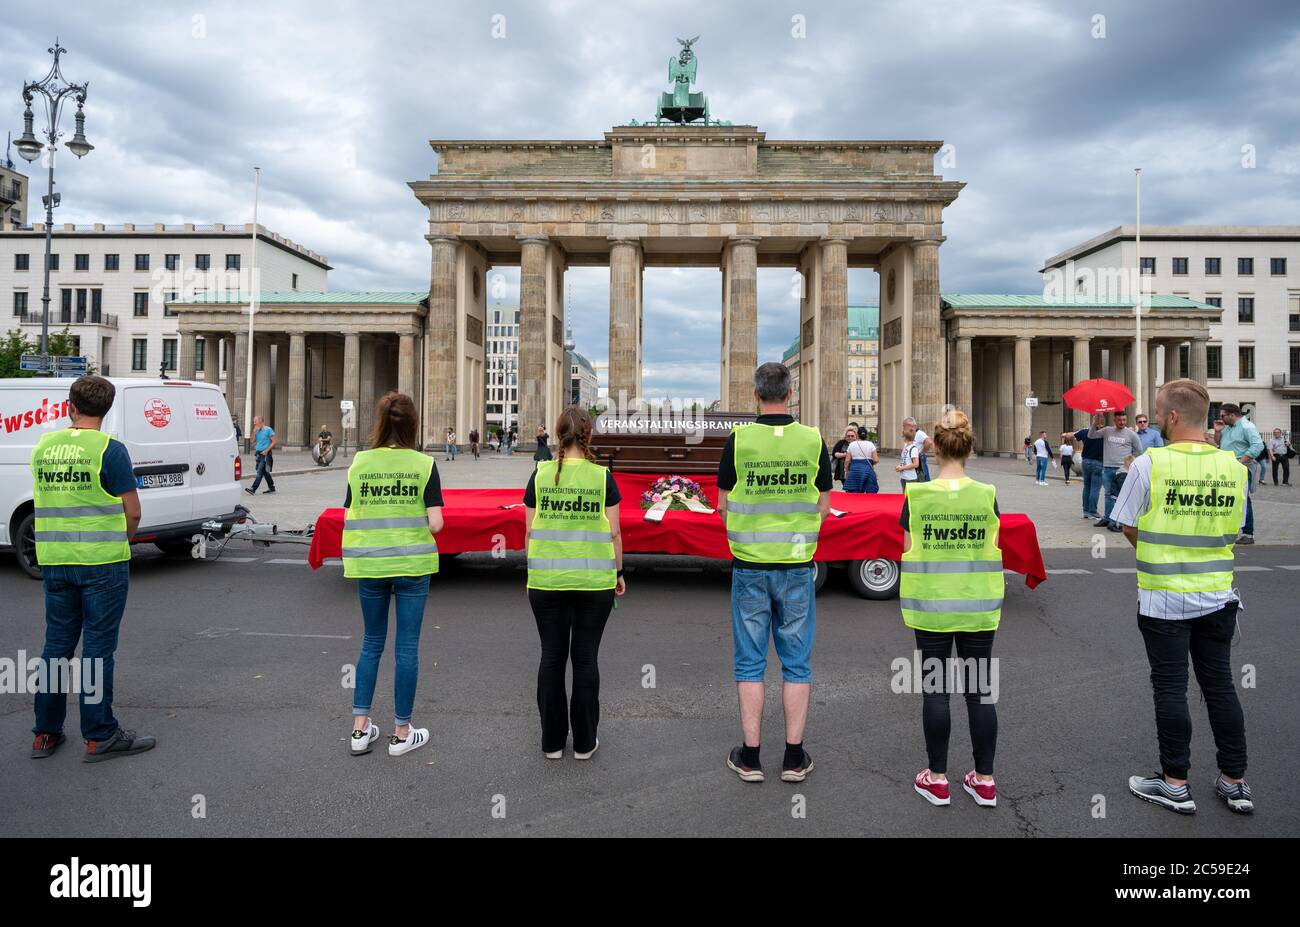 Berlin, Germany. 01st July, 2020. Demonstrators stand in front of the Brandenburg Gate wearing high-visibility vests with the inscription 'Veranstaltungsbranche - #wsdsn- Wir schaffen das so nicht'. Under the motto 'We can't do it this way', entrepreneurs of the event industry have organized a car demonstration and are protesting against the ban on large events until at least the end of October. Credit: Christophe Gateau/dpa/Alamy Live News Stock Photo